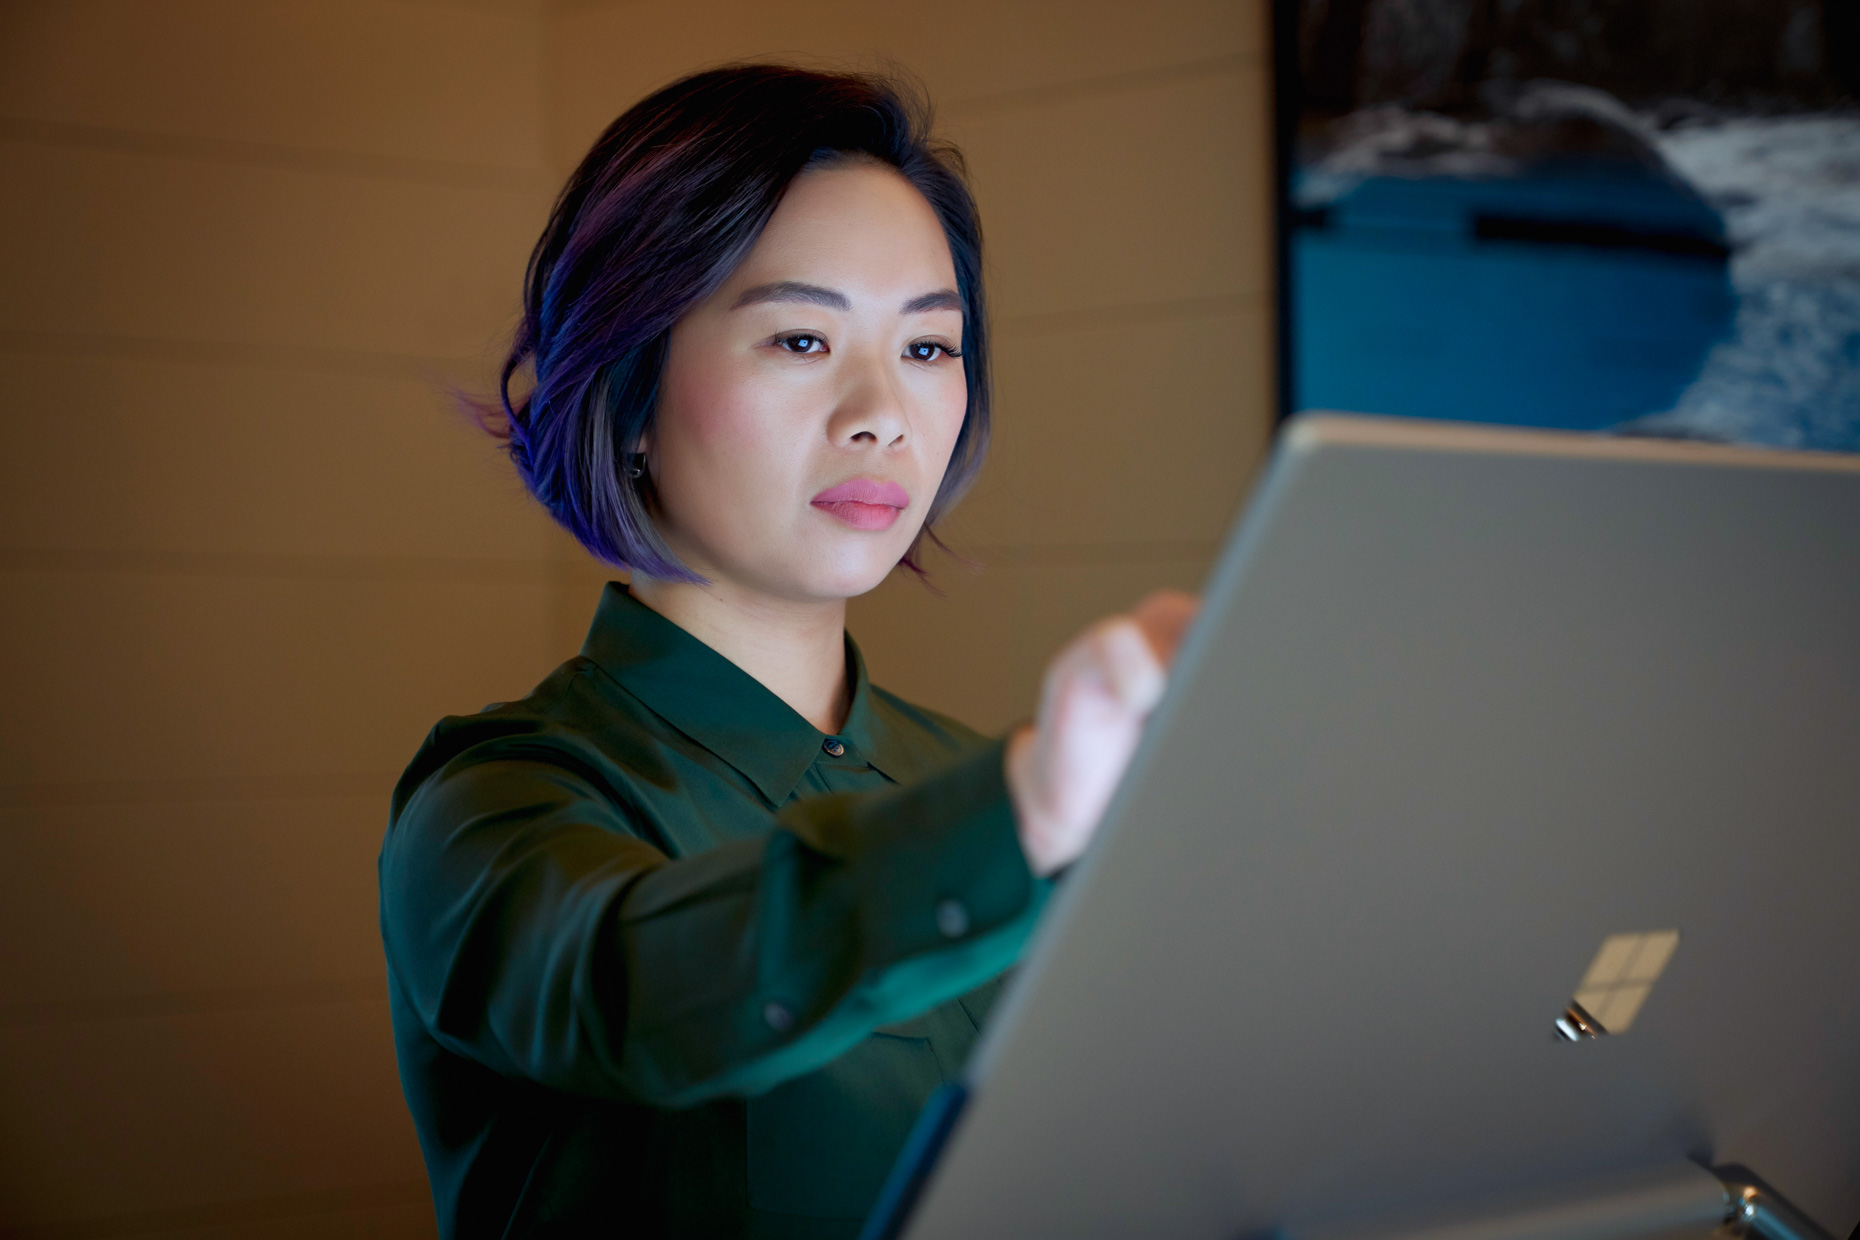 Asian woman with purpler hair working on touch screen computer